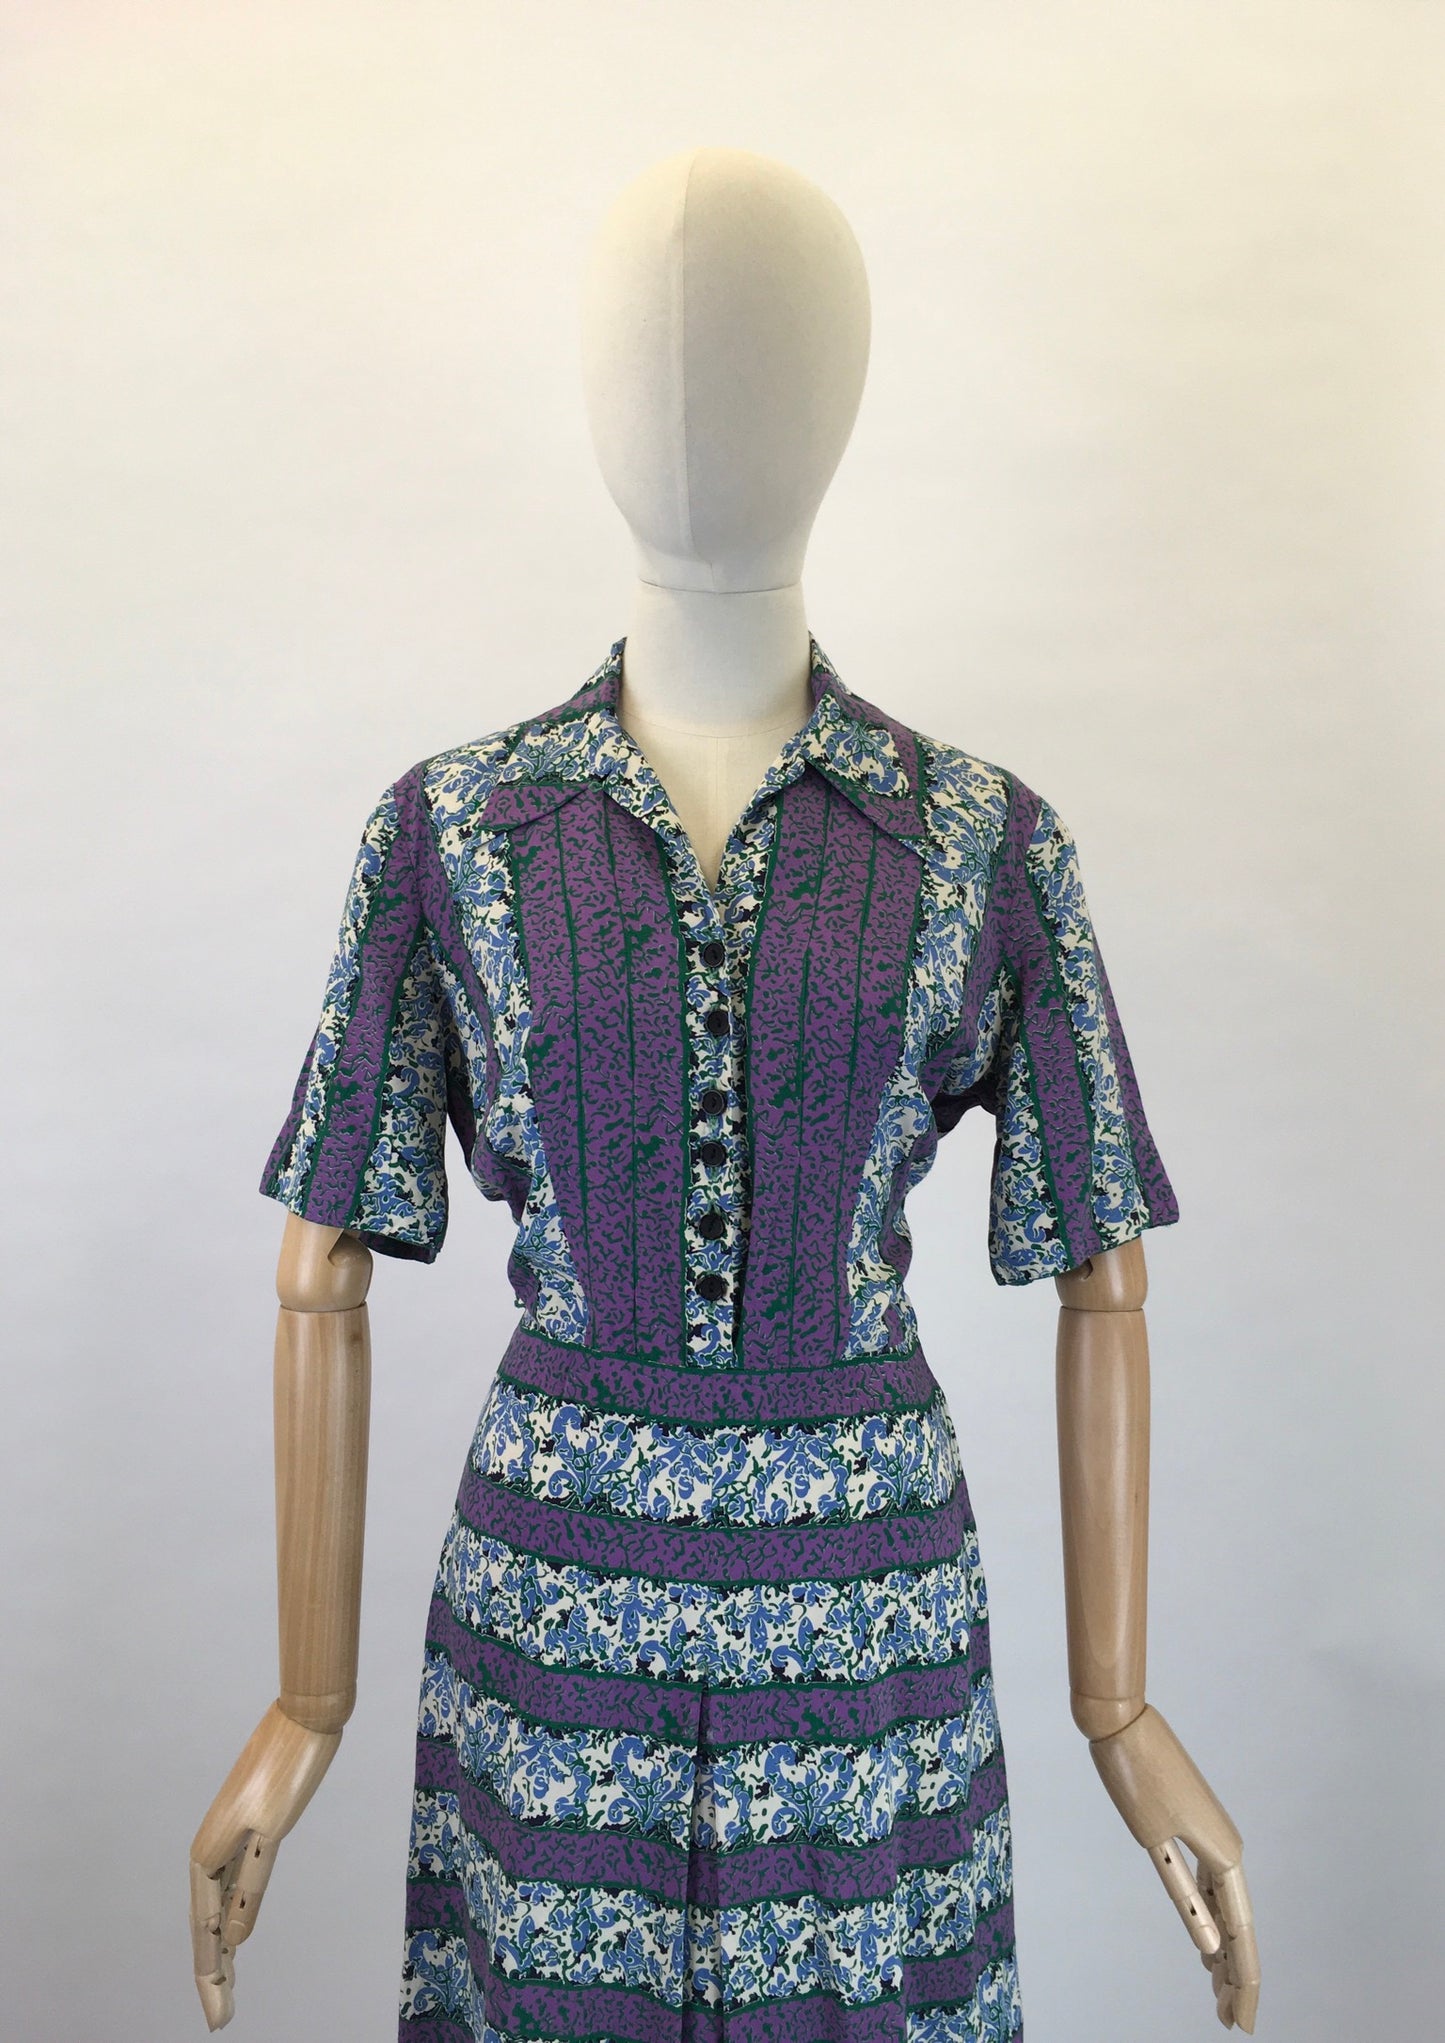 Original 1940s Rayon Dress - In Lovely Rich Purples, Greens and Whites with Florals and Stripes